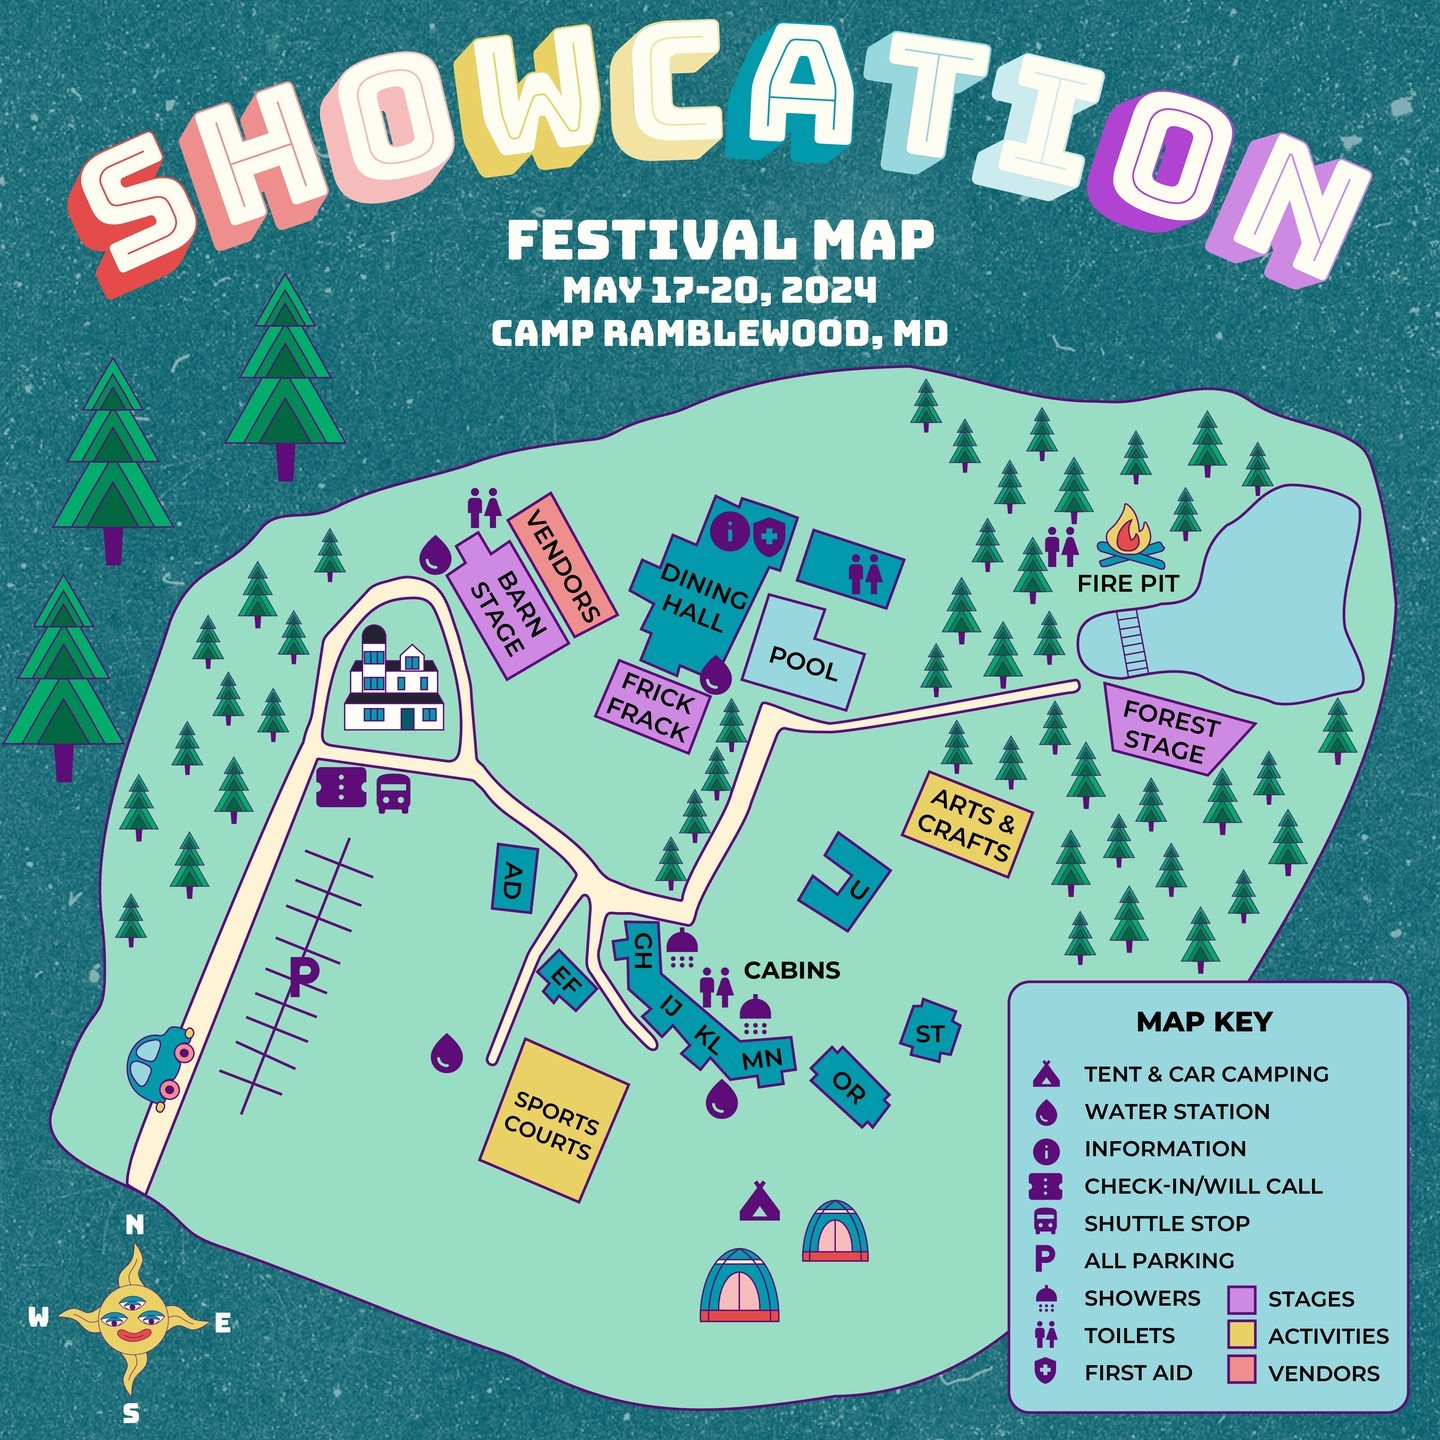 @showcationcamp is coming up!!! Join Driven AM at Camp Ramblewood, MD!
@daveshichman 
@mixmasterdoc 
@lemousky 
@the_primordial_archetypednb